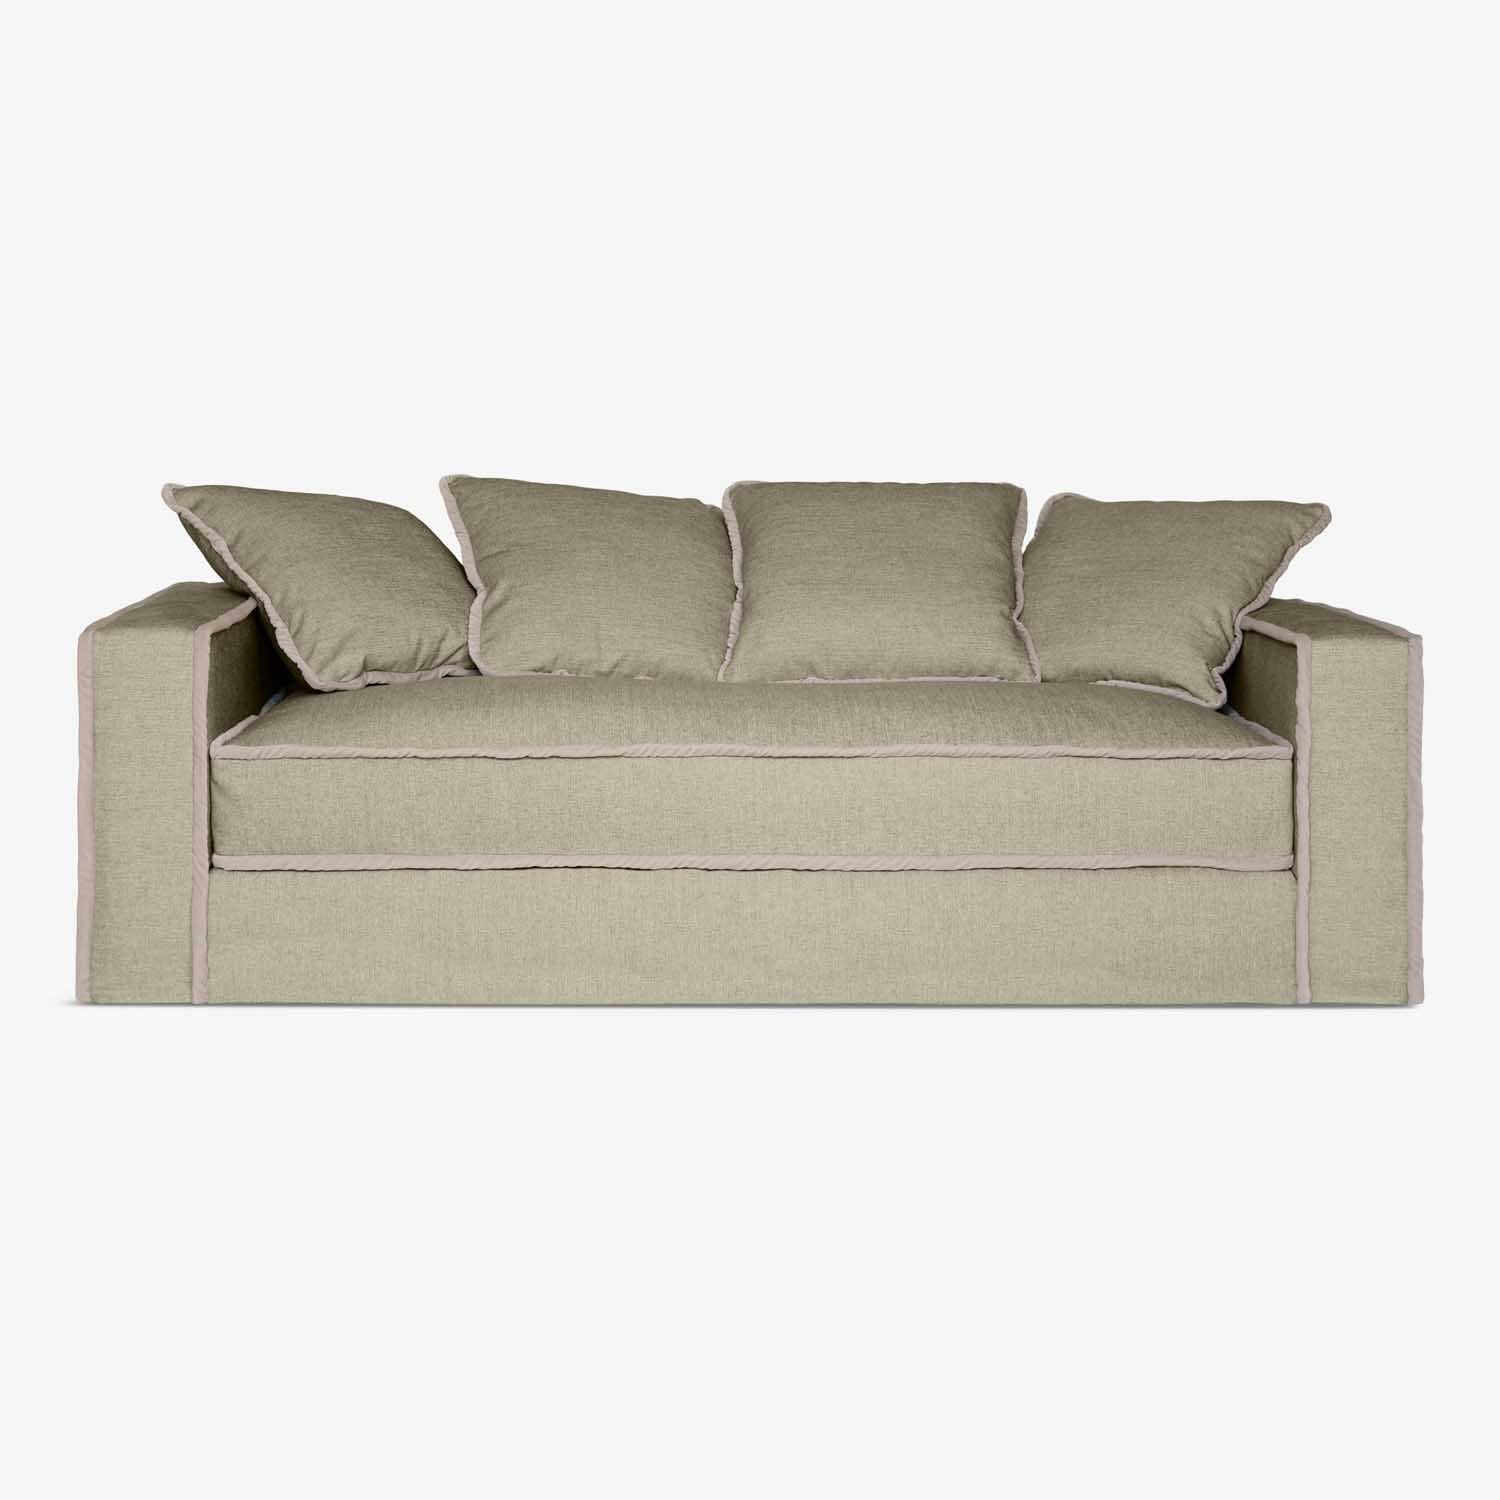 Relaxation Redefined - Luxury Sofa